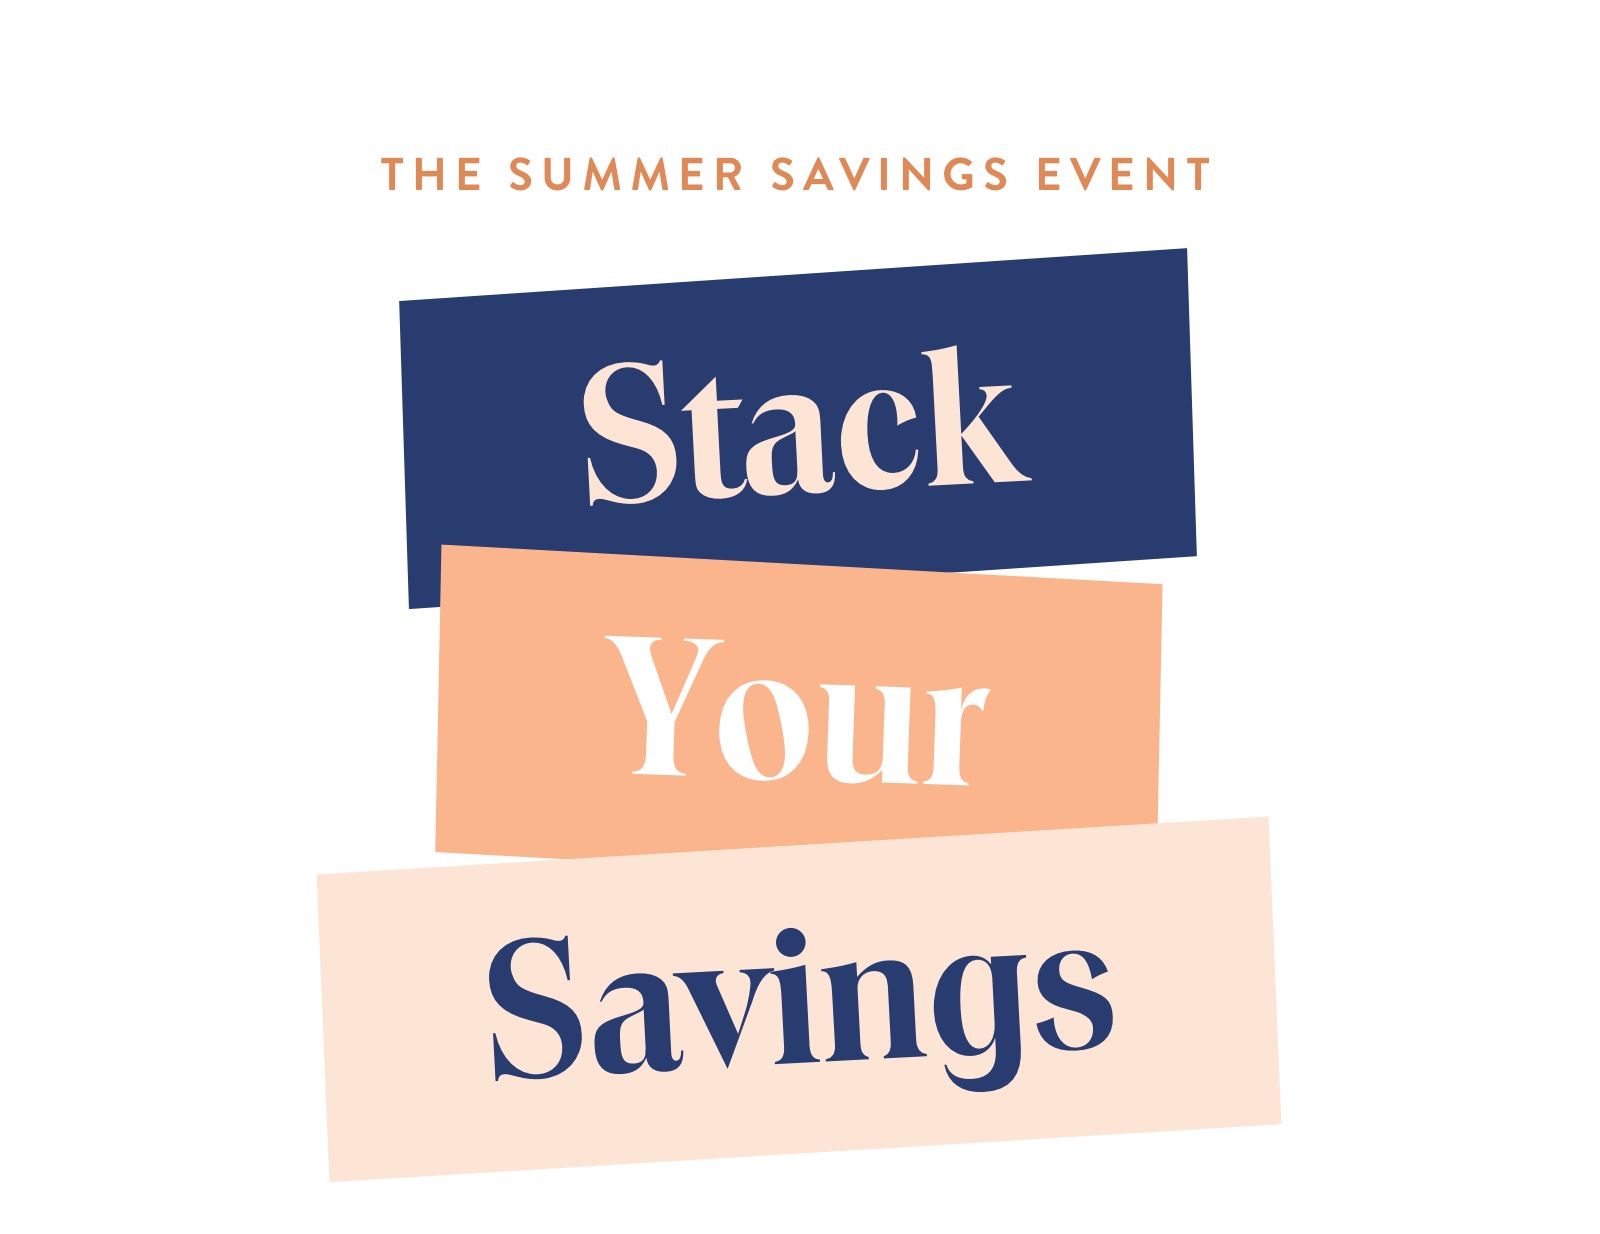 Stack your savings during the Summer Savings Event